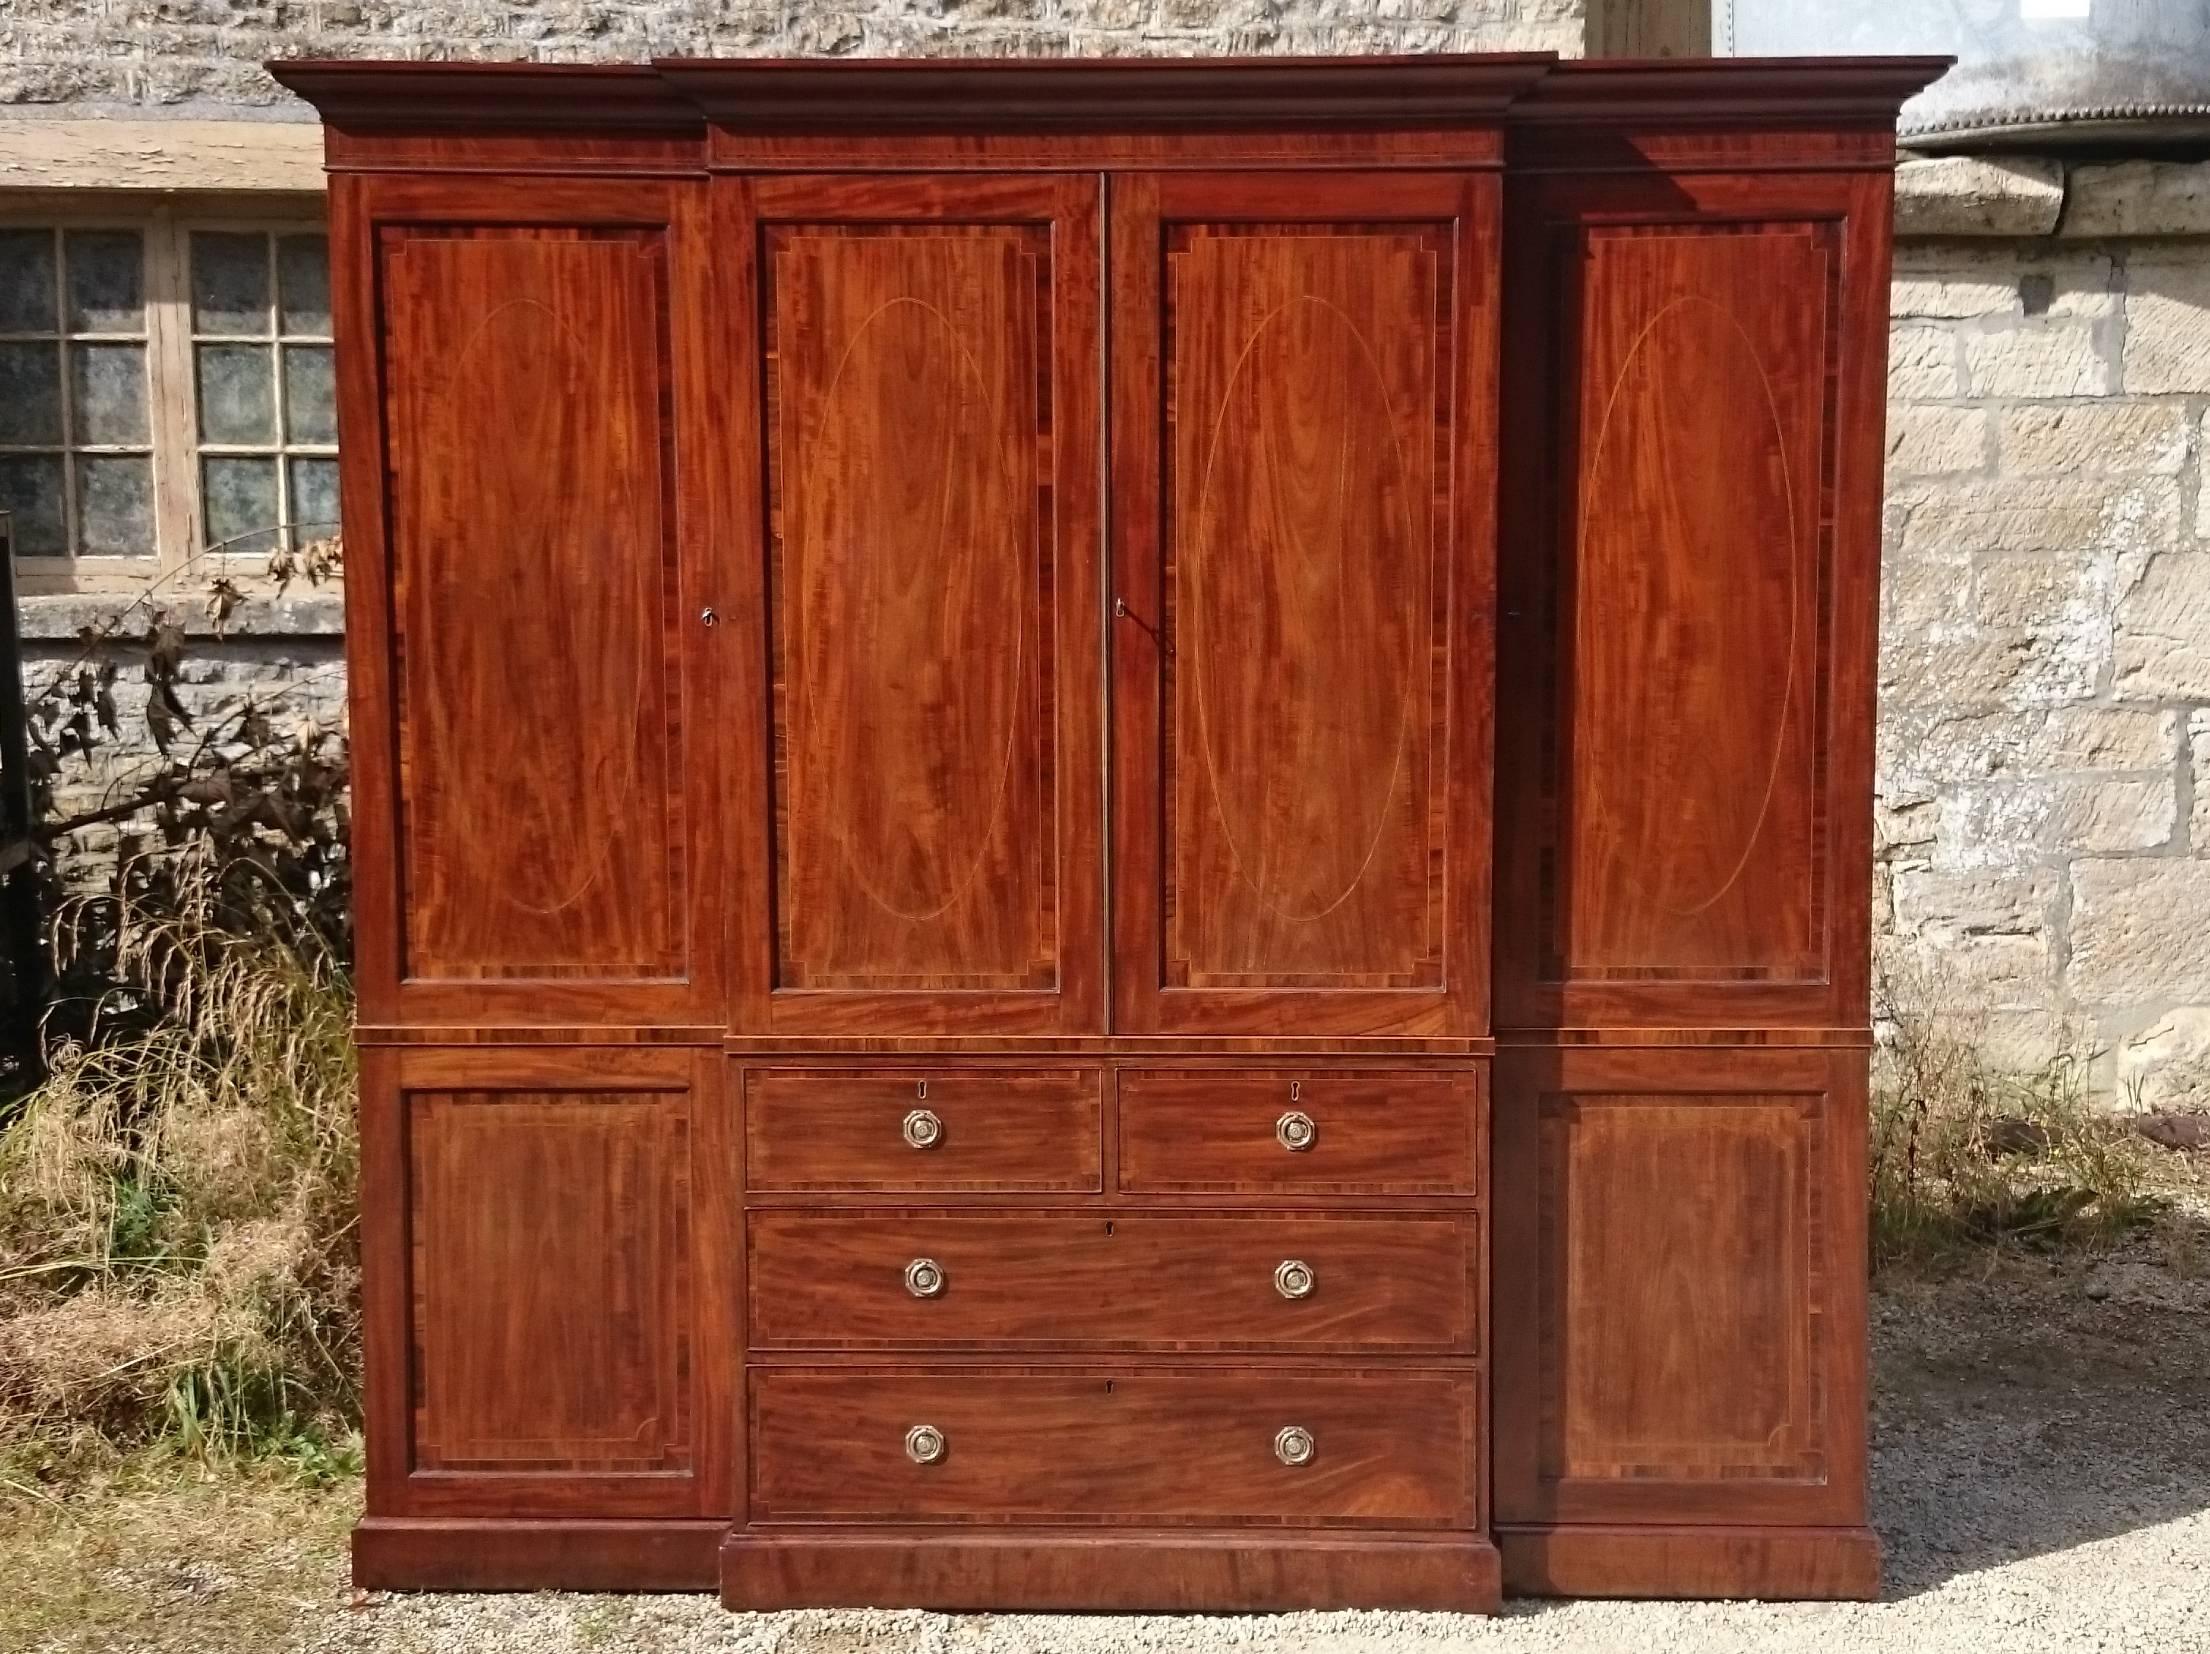 18th century antique breakfront wardrobe and linen press. This is an especially fine example of 18th century craftsmanship, all the elements are there, fine timbers, precise construction, crossbanding, stringing, dovetails, tenon joints and best